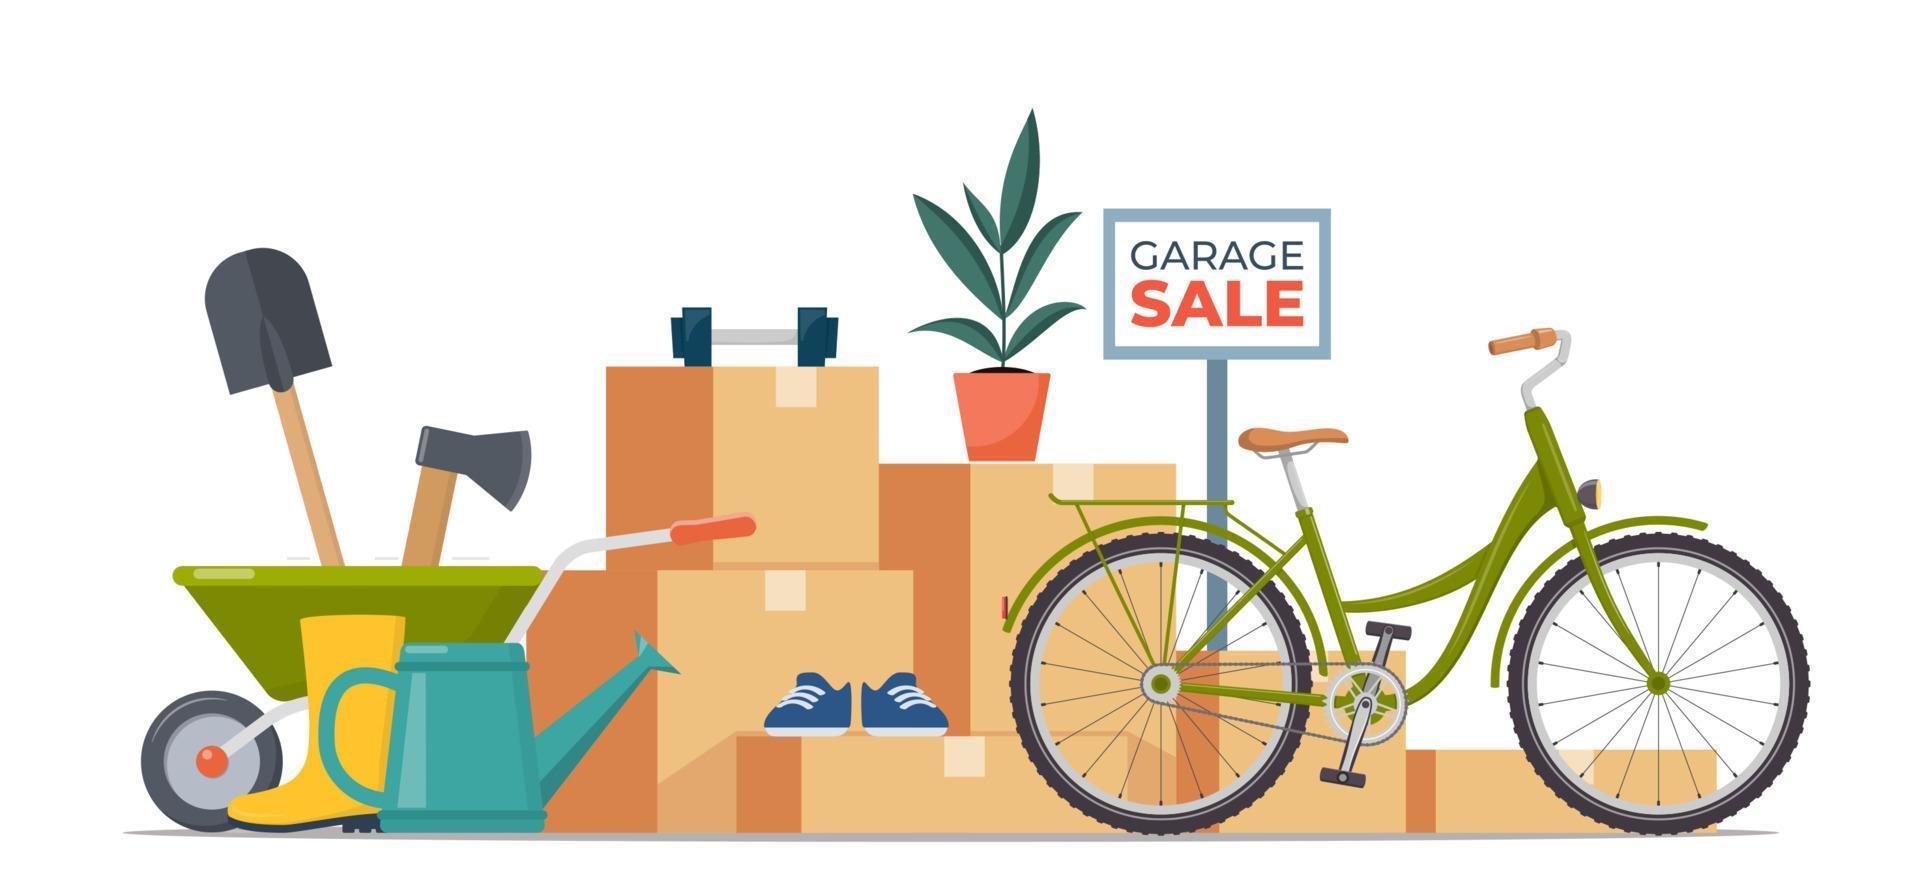 Garage sale banner with flat furniture objects arranged on the floor - house plants, guitar, books, clothes, chair and others. Flea market old stuff clutter. Vector illustration.